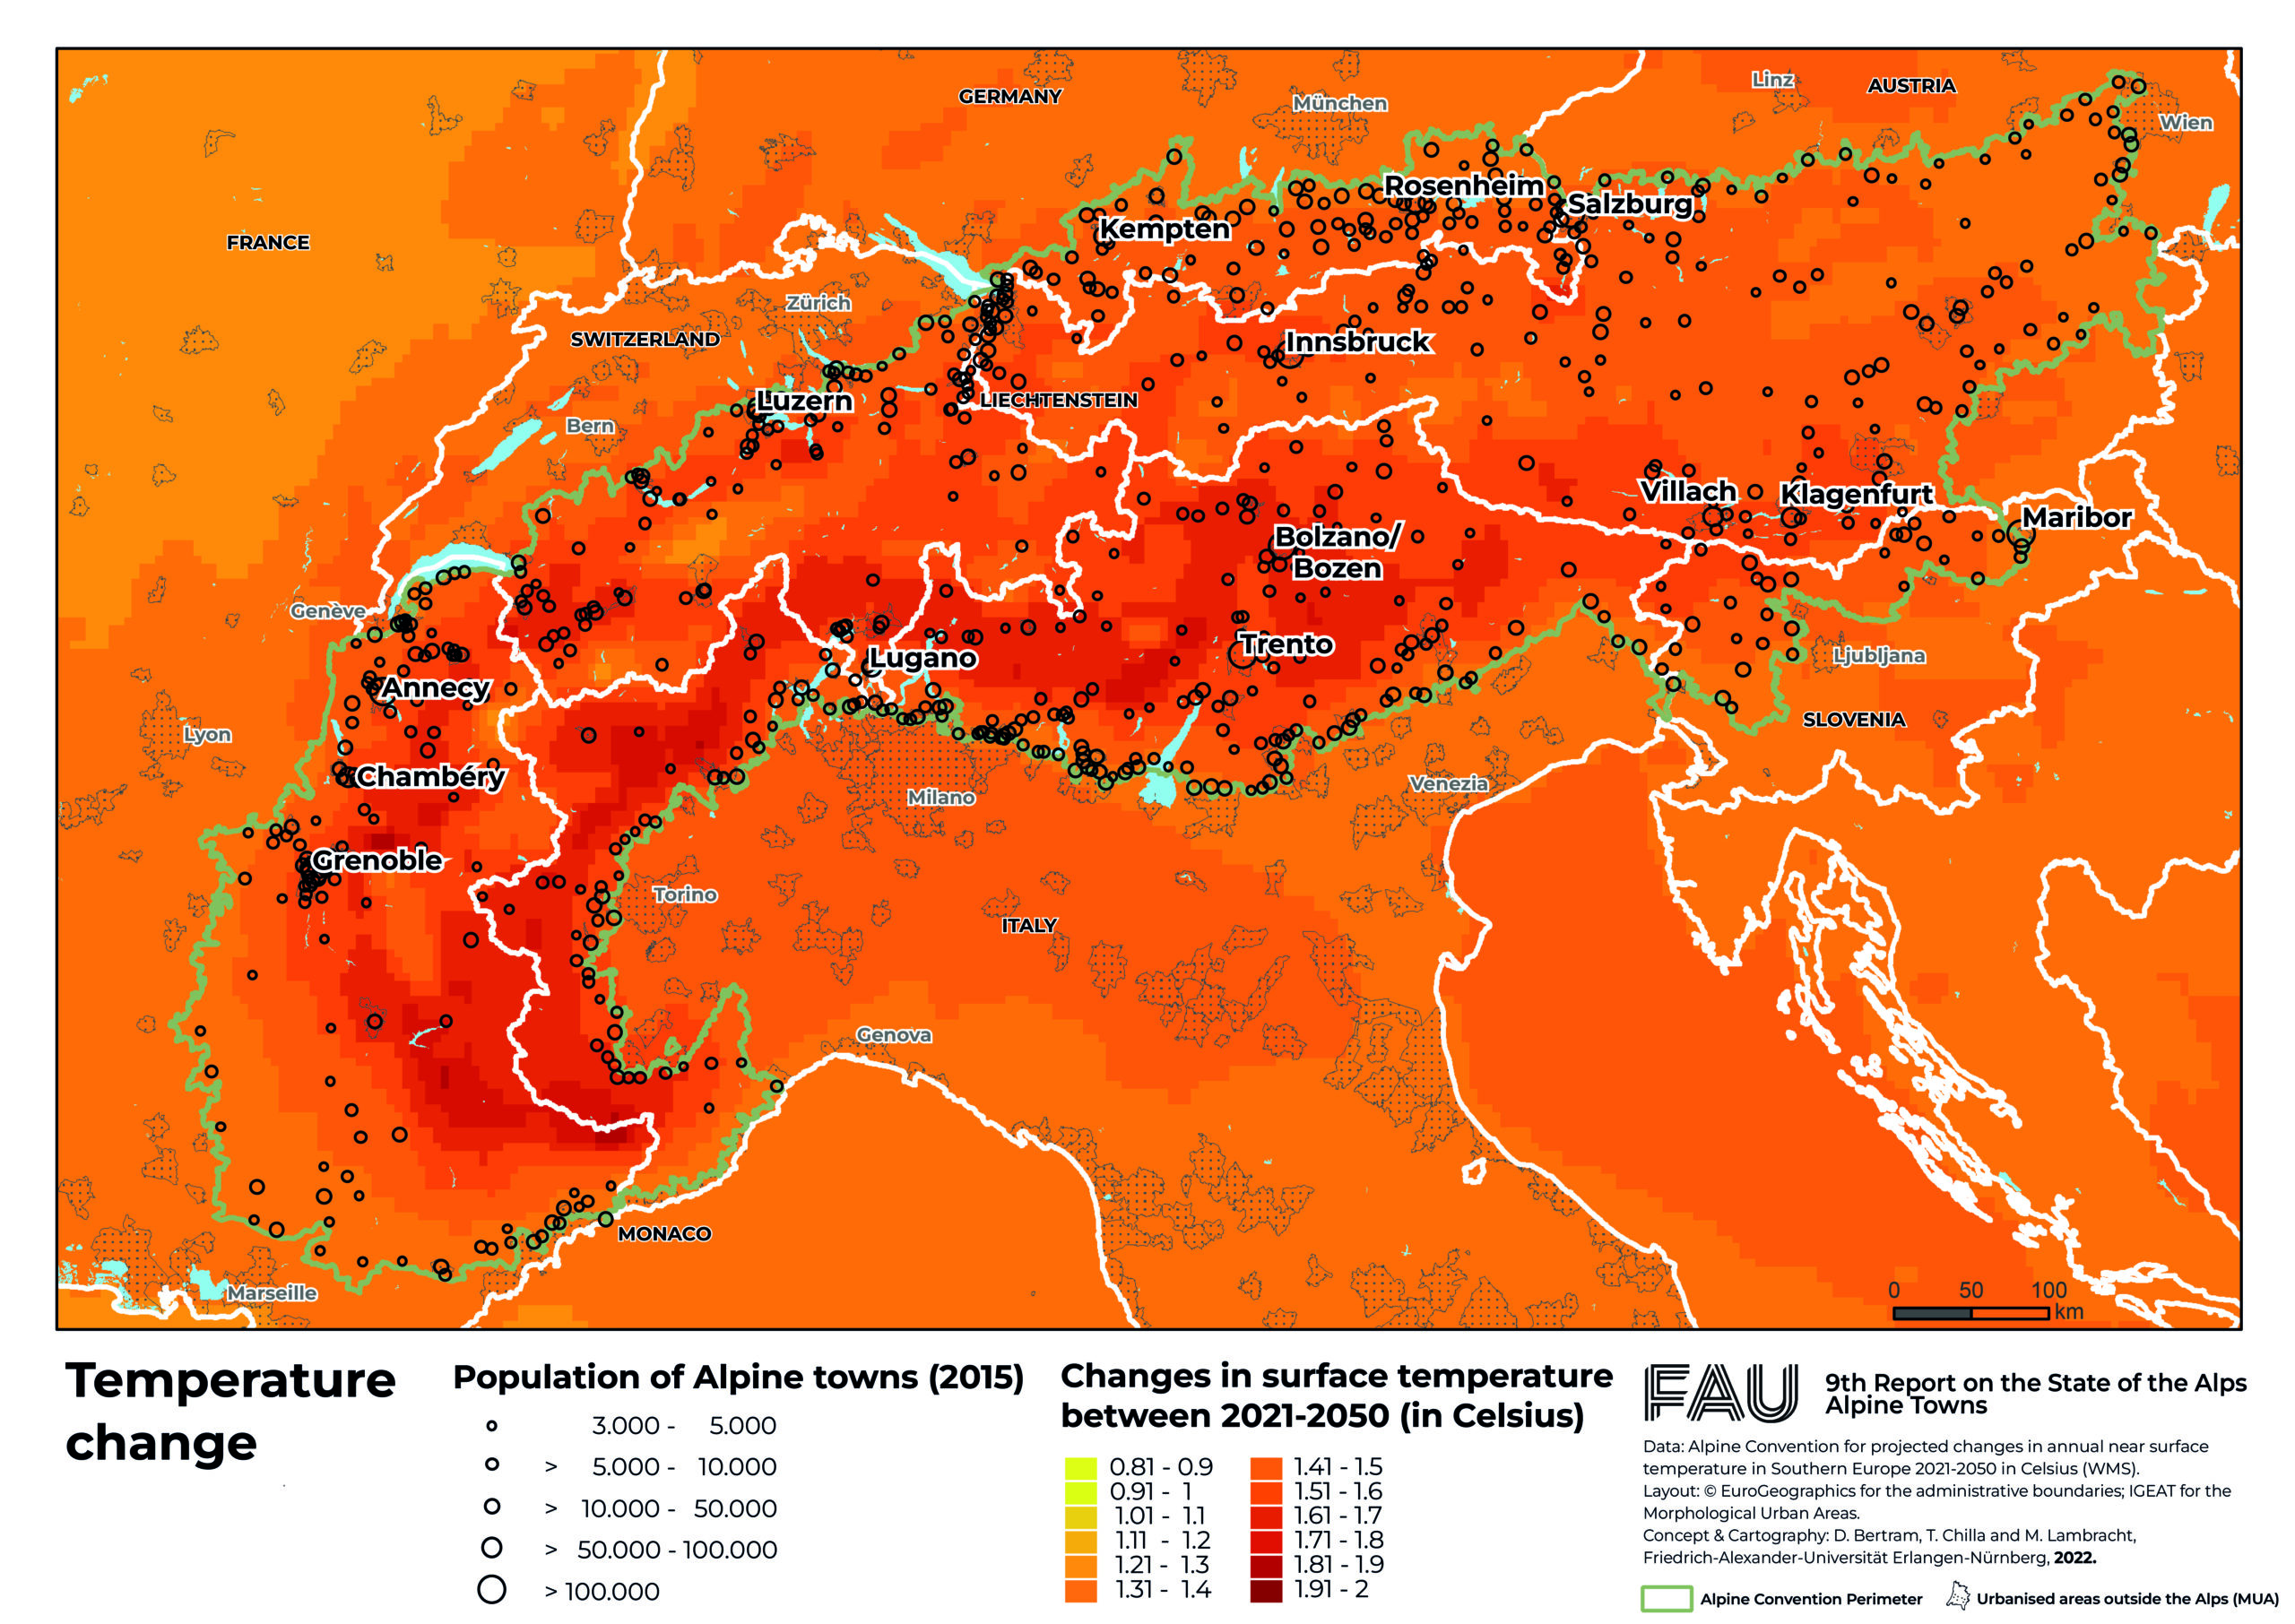 Projected changes in surface temperatures in the Alps, 2021-2050. The Alpine region experiences a higher temperature rise than peri-Alpine areas or at least that the temperature changes start earlier. Large parts of Bavaria, Lombardy and other regions depend on ecosystem services provided by the Alps. Decreasing quantities of water and a reduced reliability of supply will become major issues in the coming decades. This affects not only the drinking water supply but also agriculture, energy production, and industrial cooling demand. Graphic: FAU